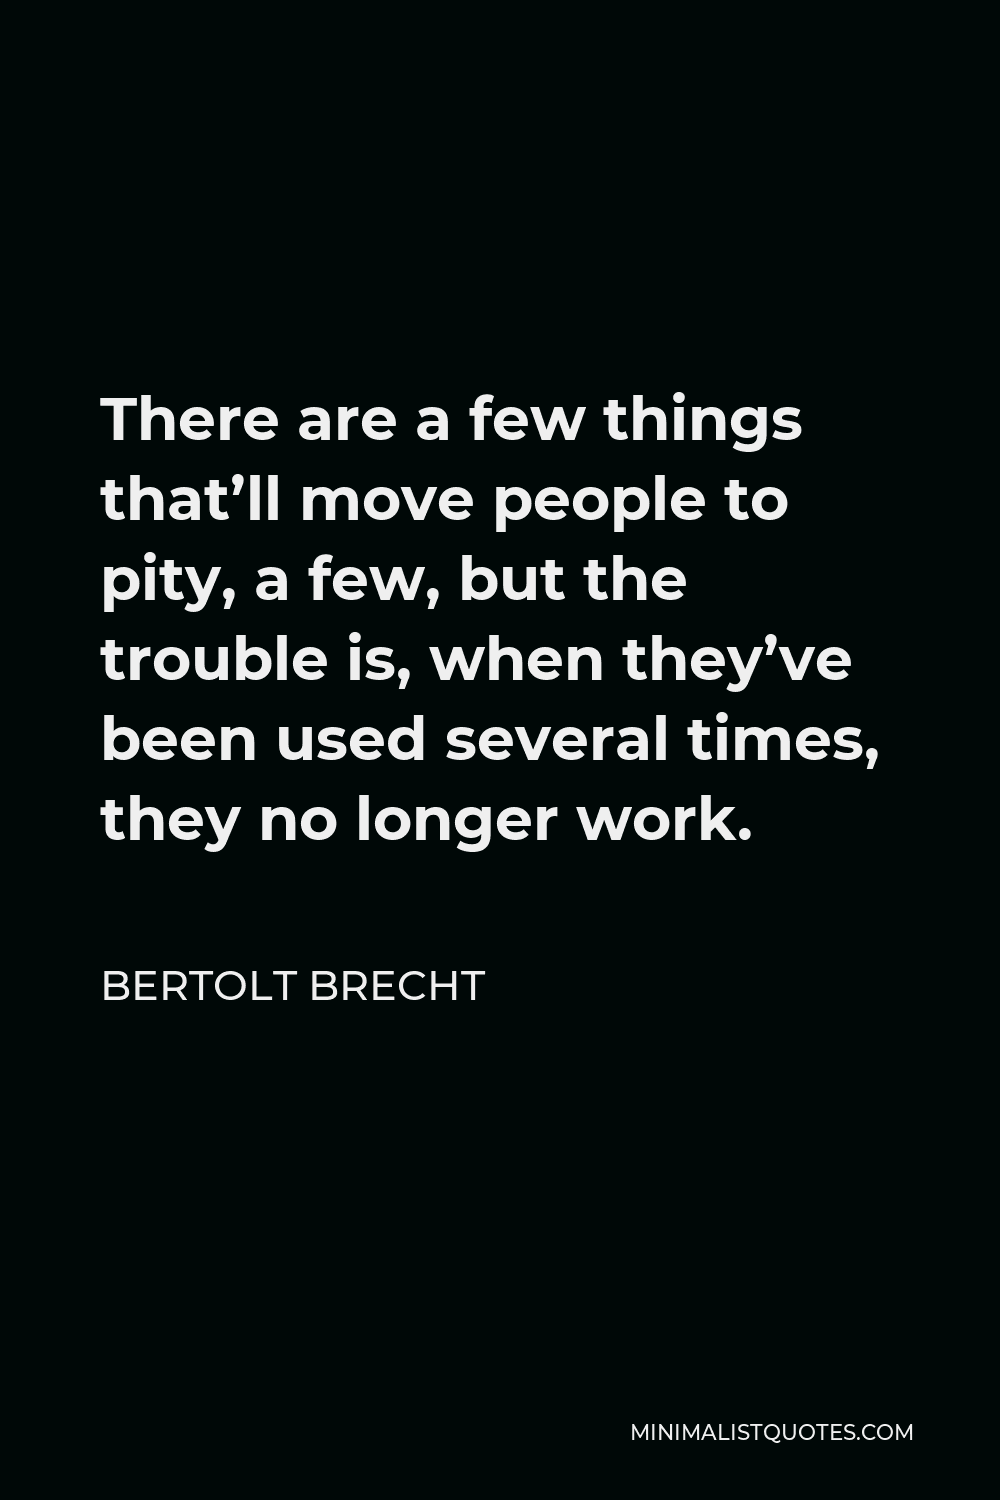 Bertolt Brecht Quote - There are a few things that’ll move people to pity, a few, but the trouble is, when they’ve been used several times, they no longer work.